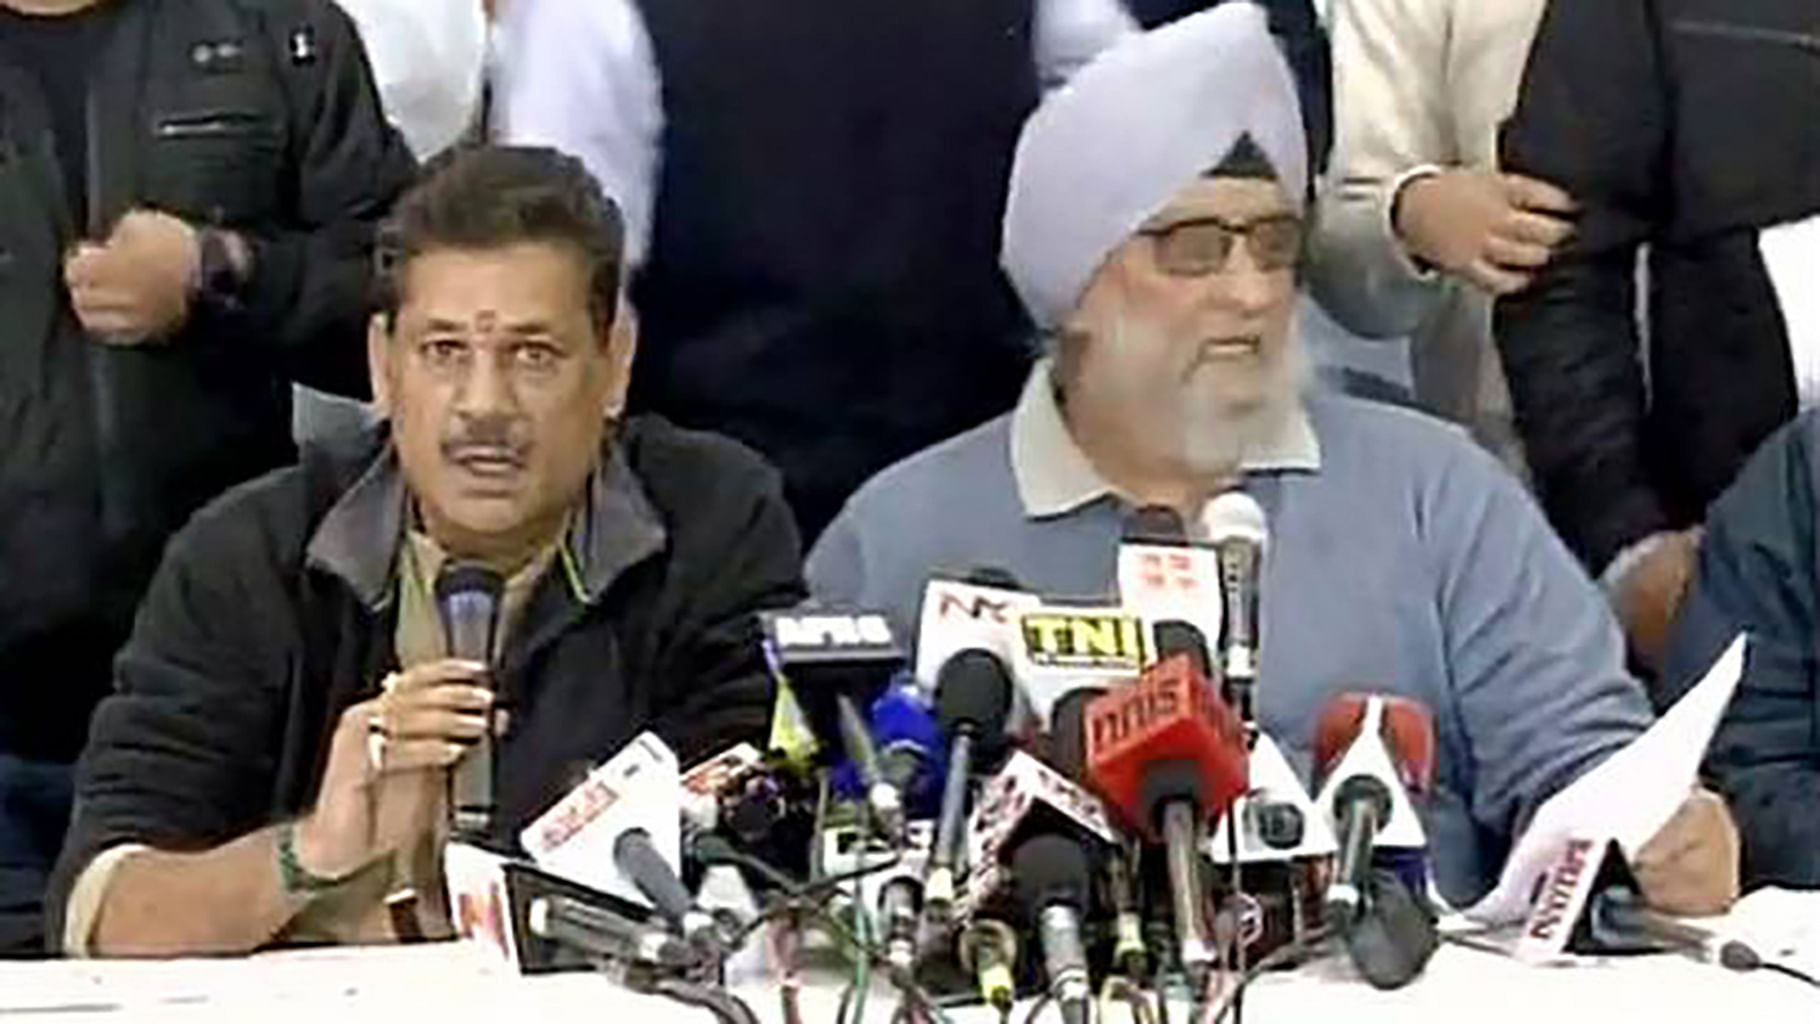 Kirti Azad (left) and Bishan Singh Bedi during a press conference on Sunday. (Photo: ANI)